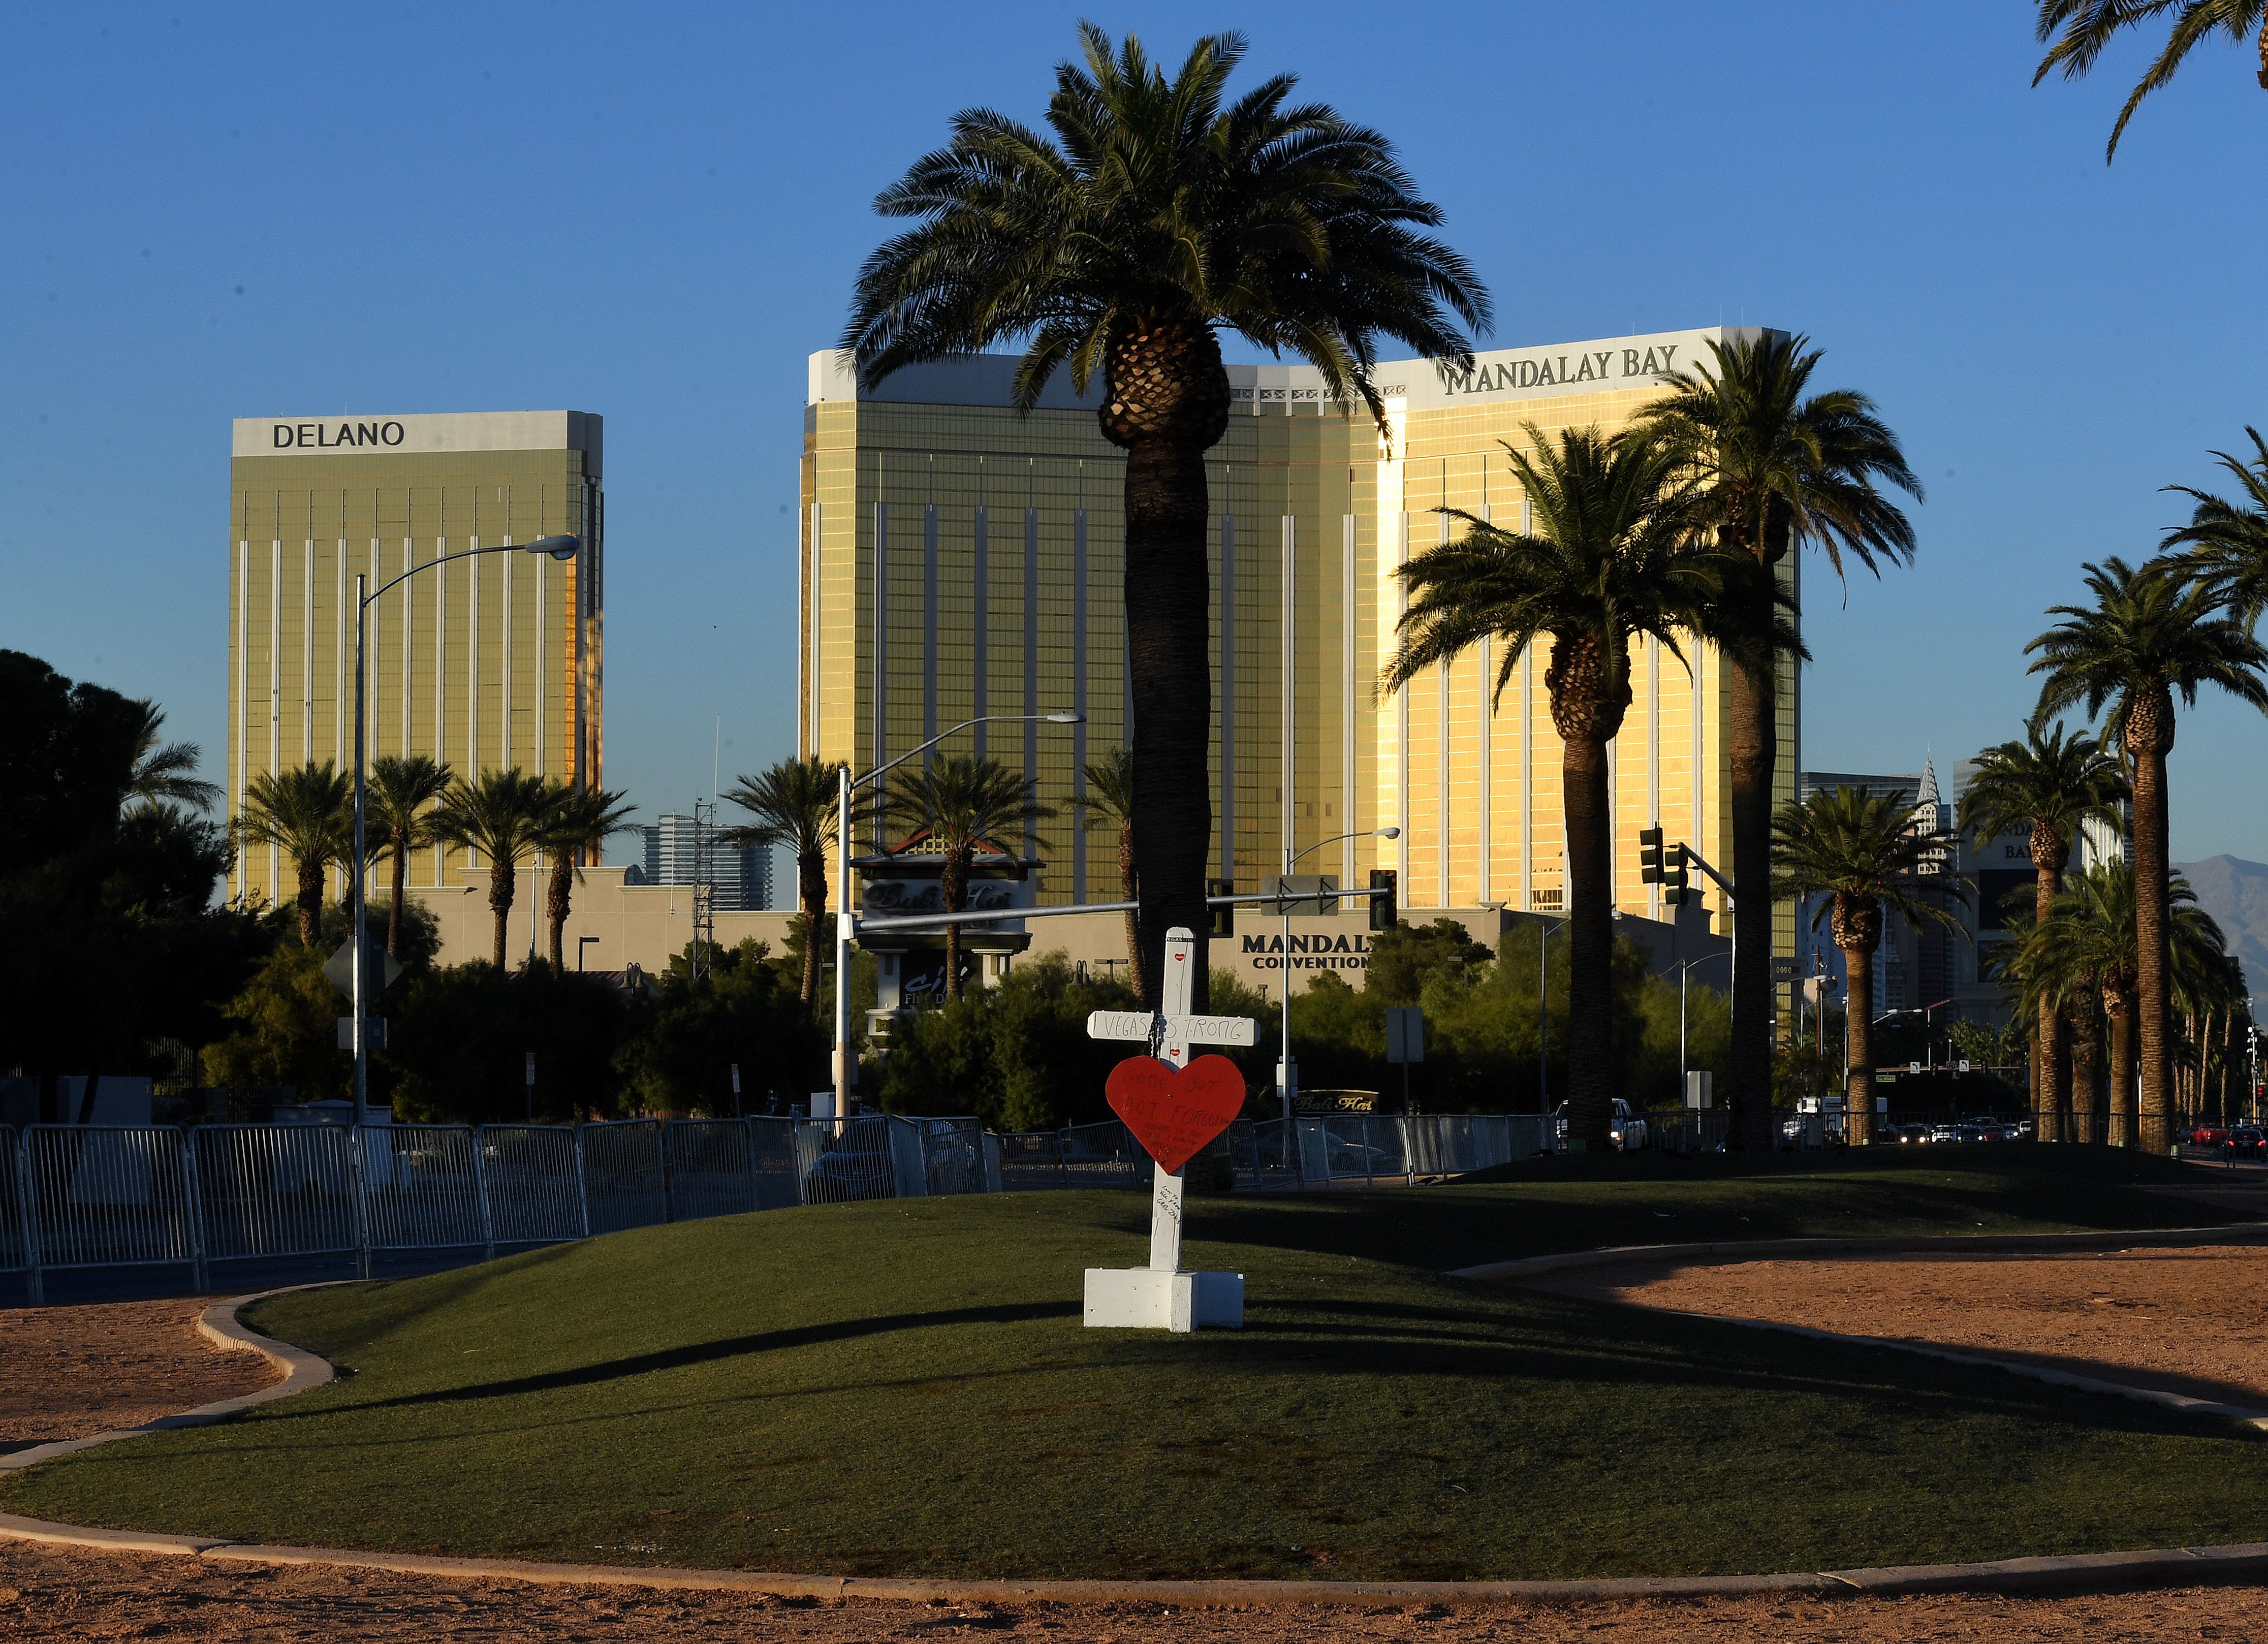 A solitary cross marks a memorial site in front of the Mandalay Hotel where 58 people were killed in Las Vegas, Nevada on Oct. 1, 2017. (Mark Ralston&mdash;AFP/Getty Images)